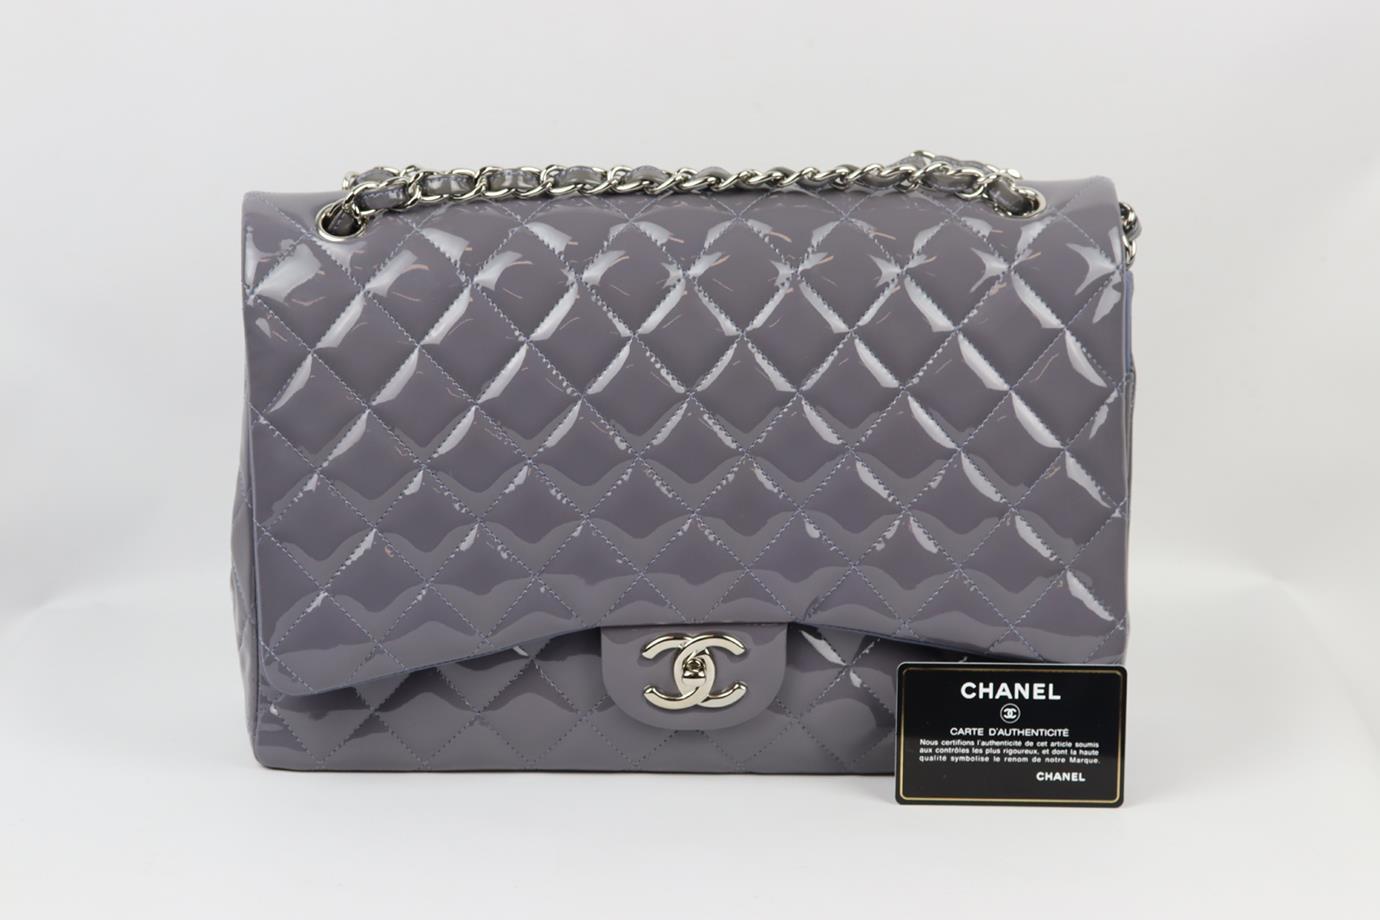 Chanel 2012 Maxi Classic Quilted Patent Leather Double Flap Shoulder Bag For Sale 8